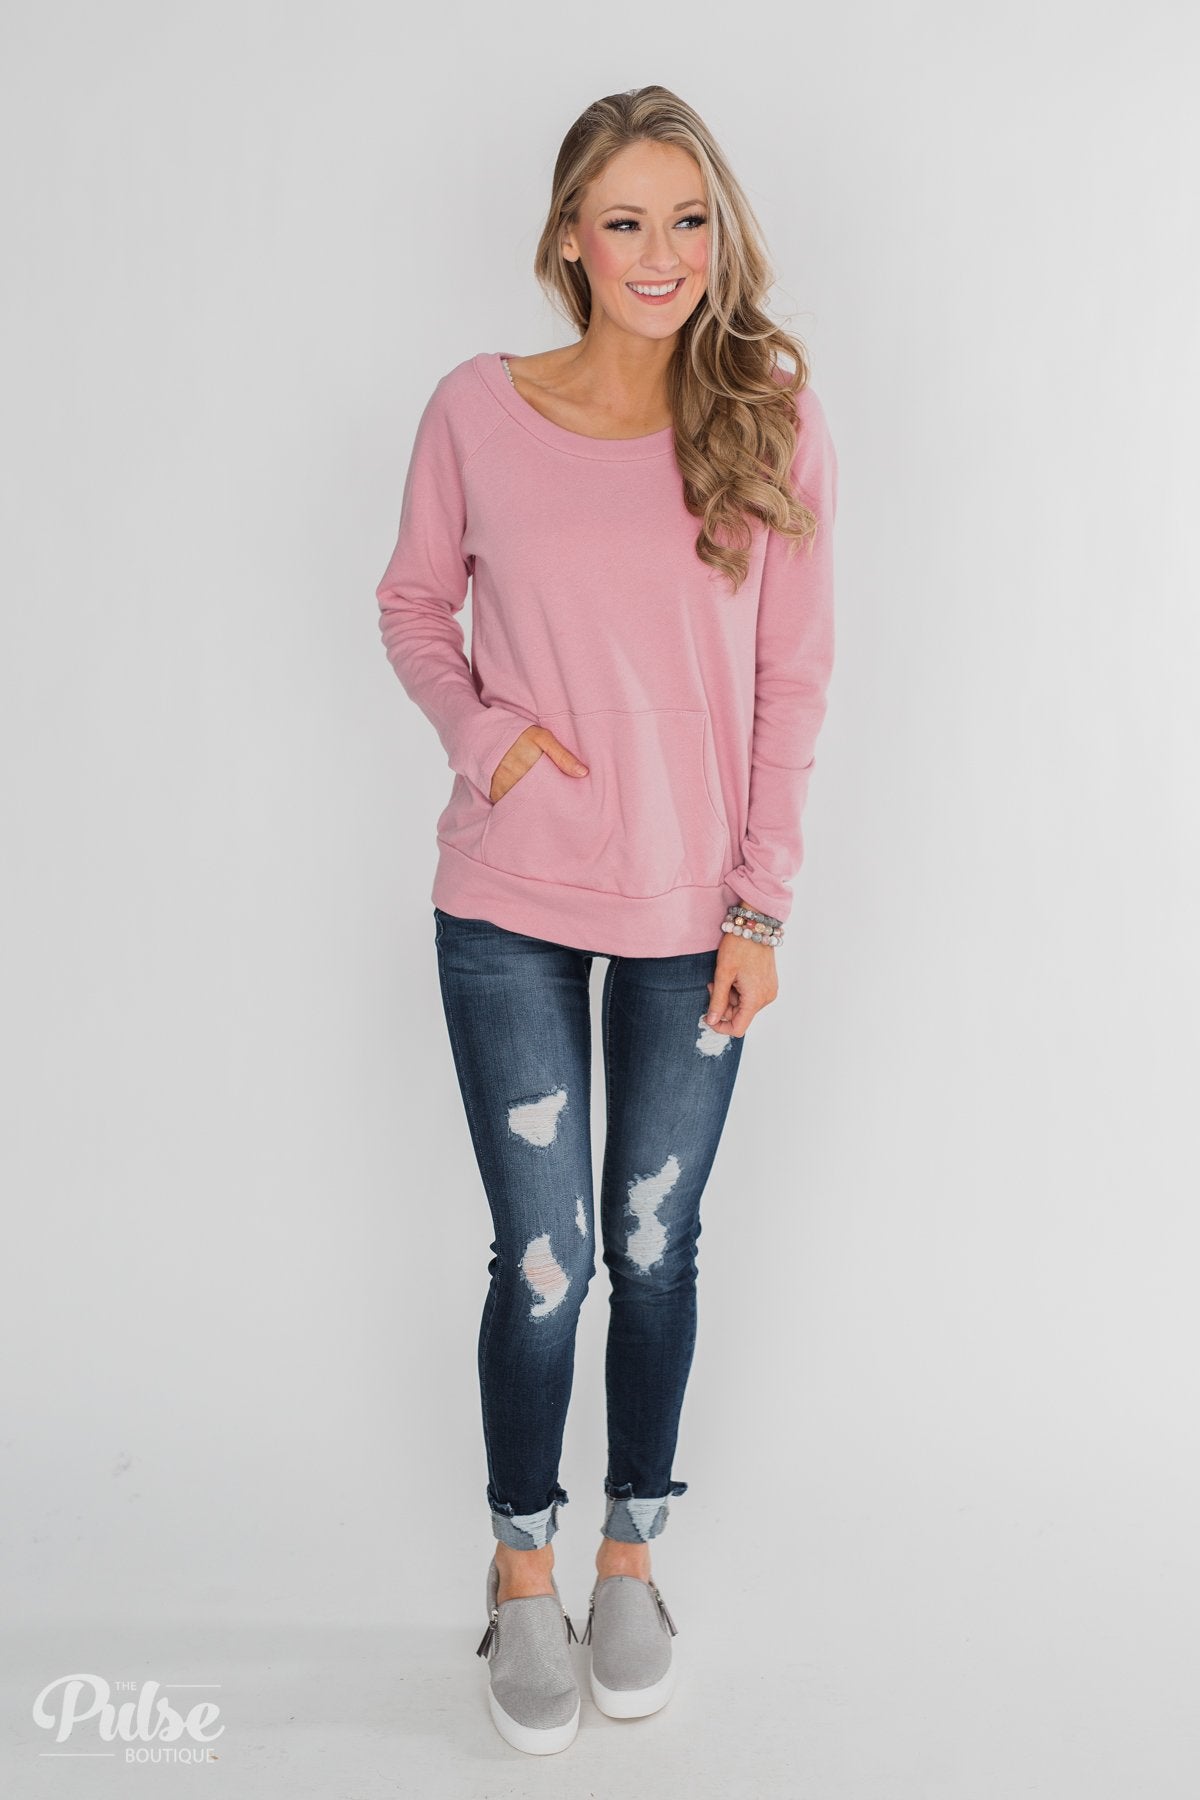 Pocket Pullover Top - Dusty Pink